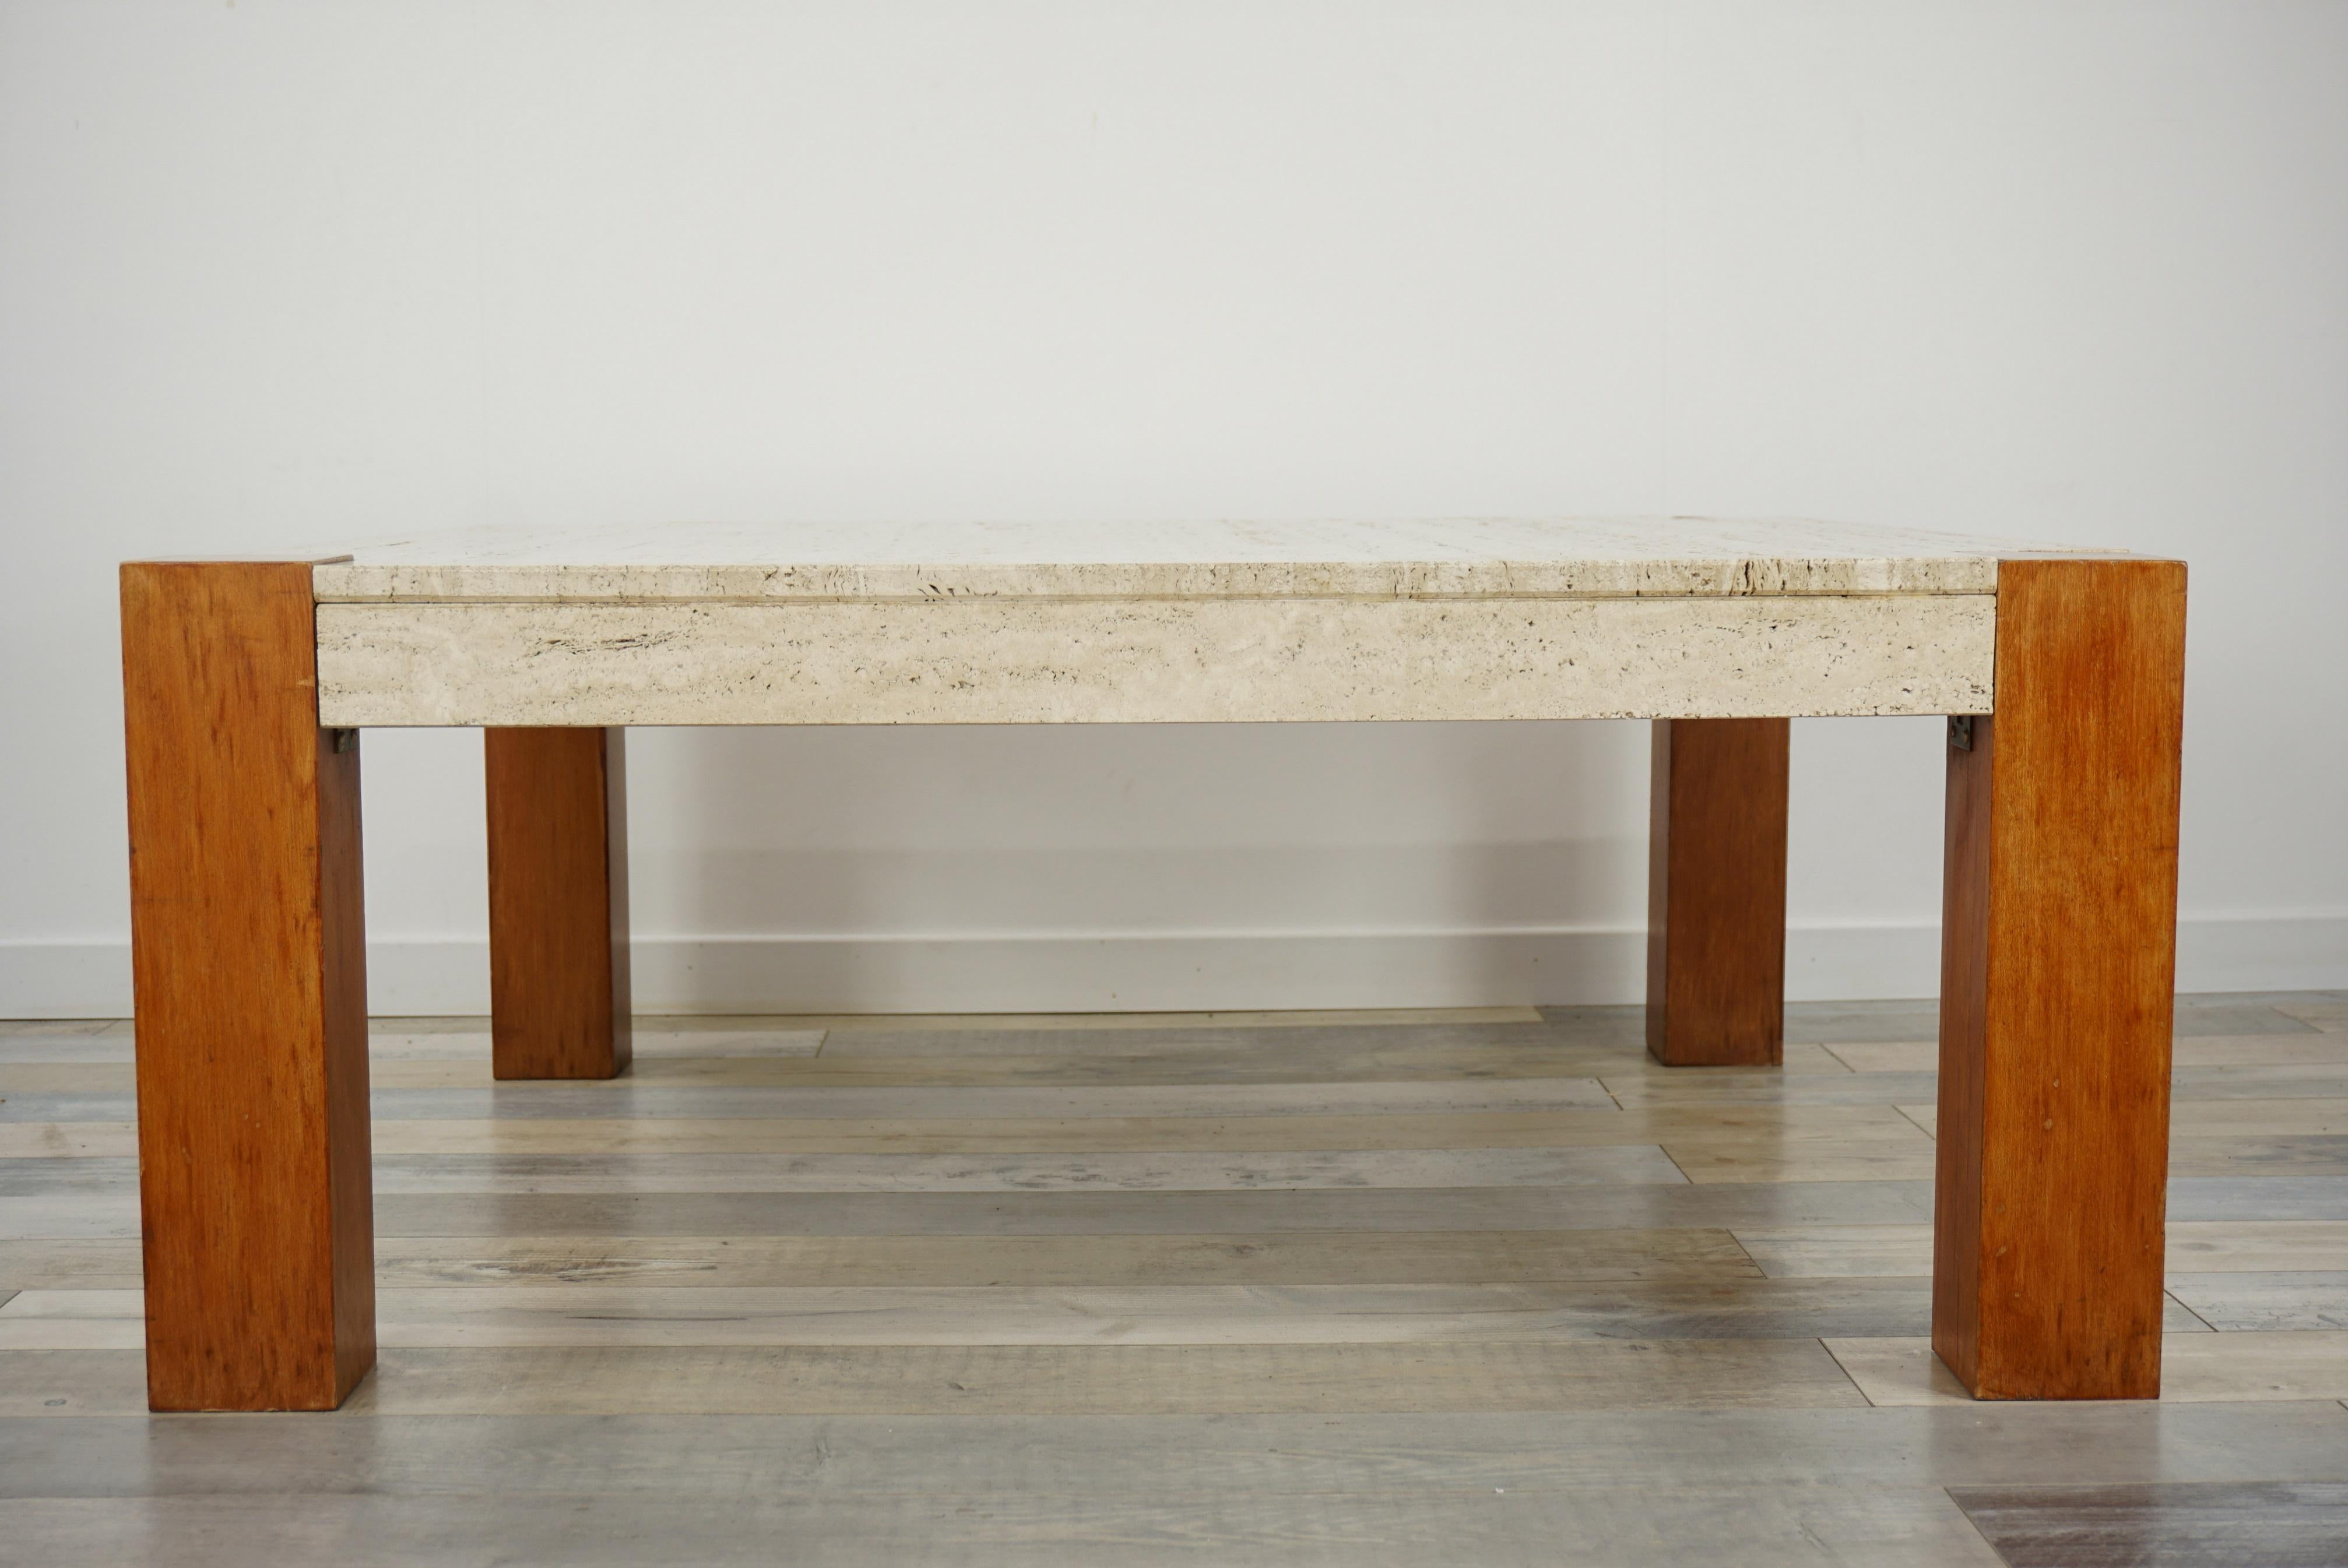 1960s design travertine and wood coffee table combining tradition and innovation: square wooden feet and a square polished travertine tray.